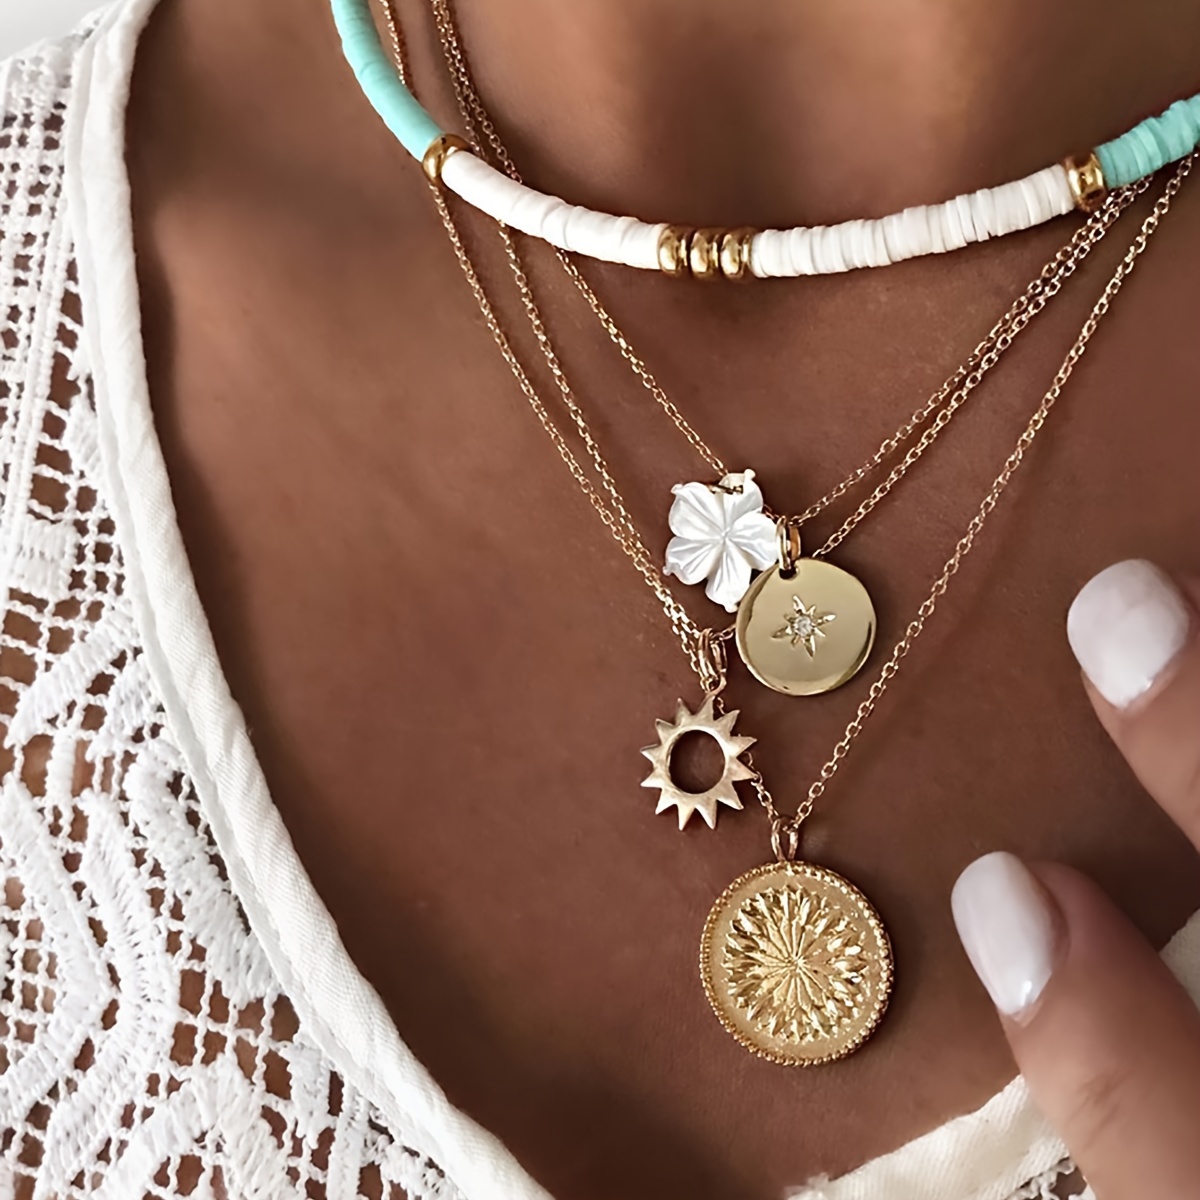 

2pcs Sun Flower Pendant Necklace Soft Pottery Decor Clavicle Chain Multi-layer Necklace Jewelry For Women